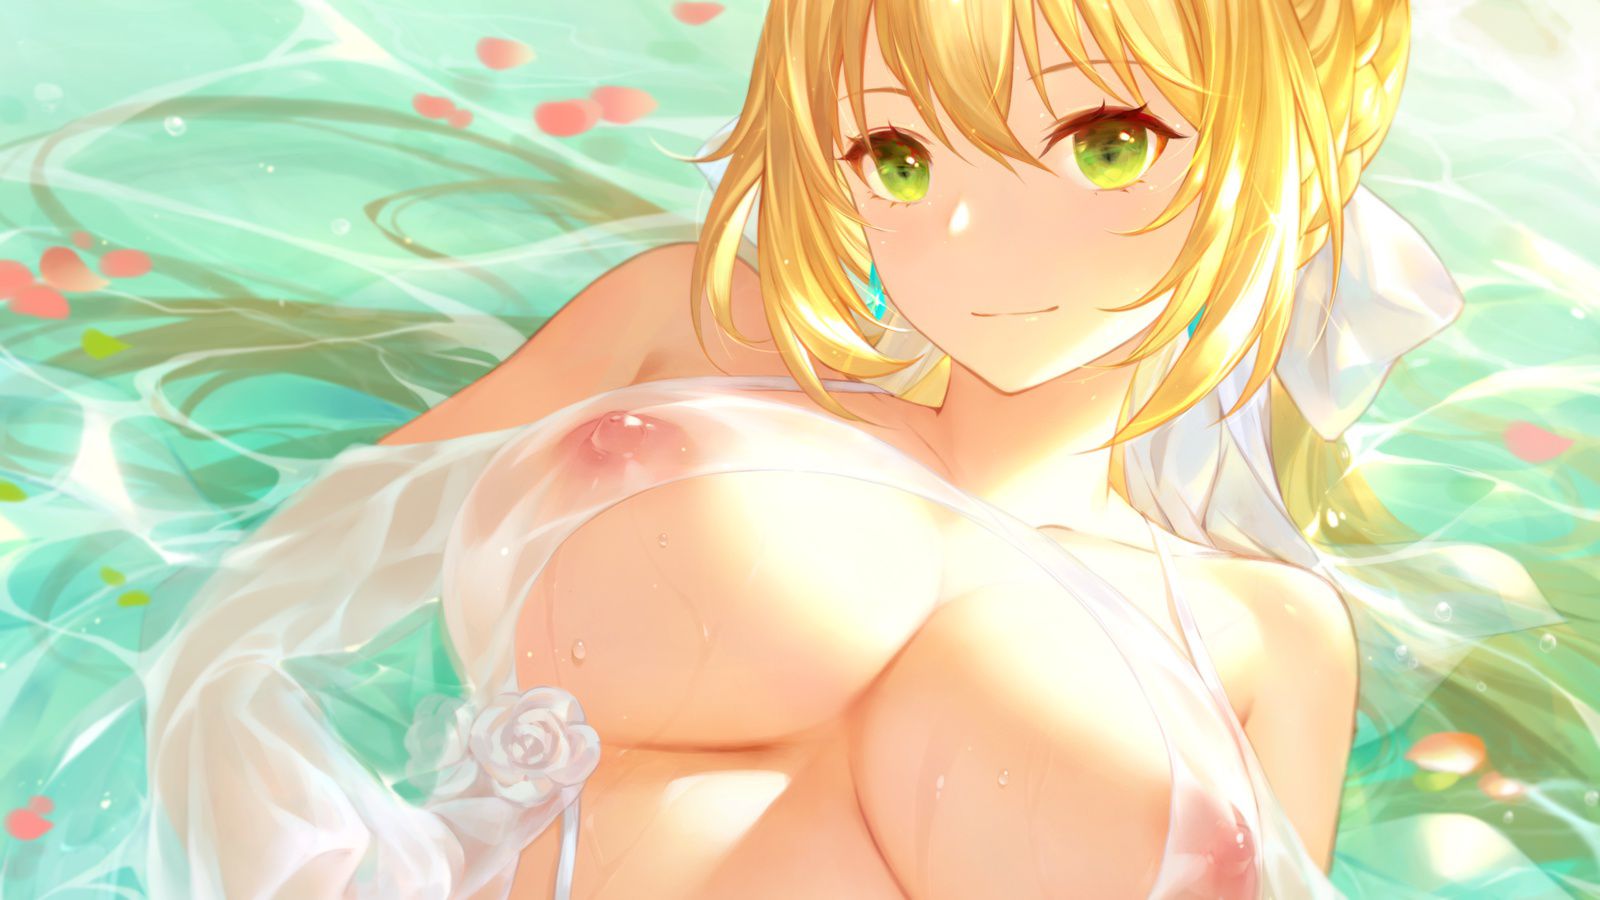 [Secondary erotic] Click here for a summary of erotic images of Nero Claudius in the Fate series 29